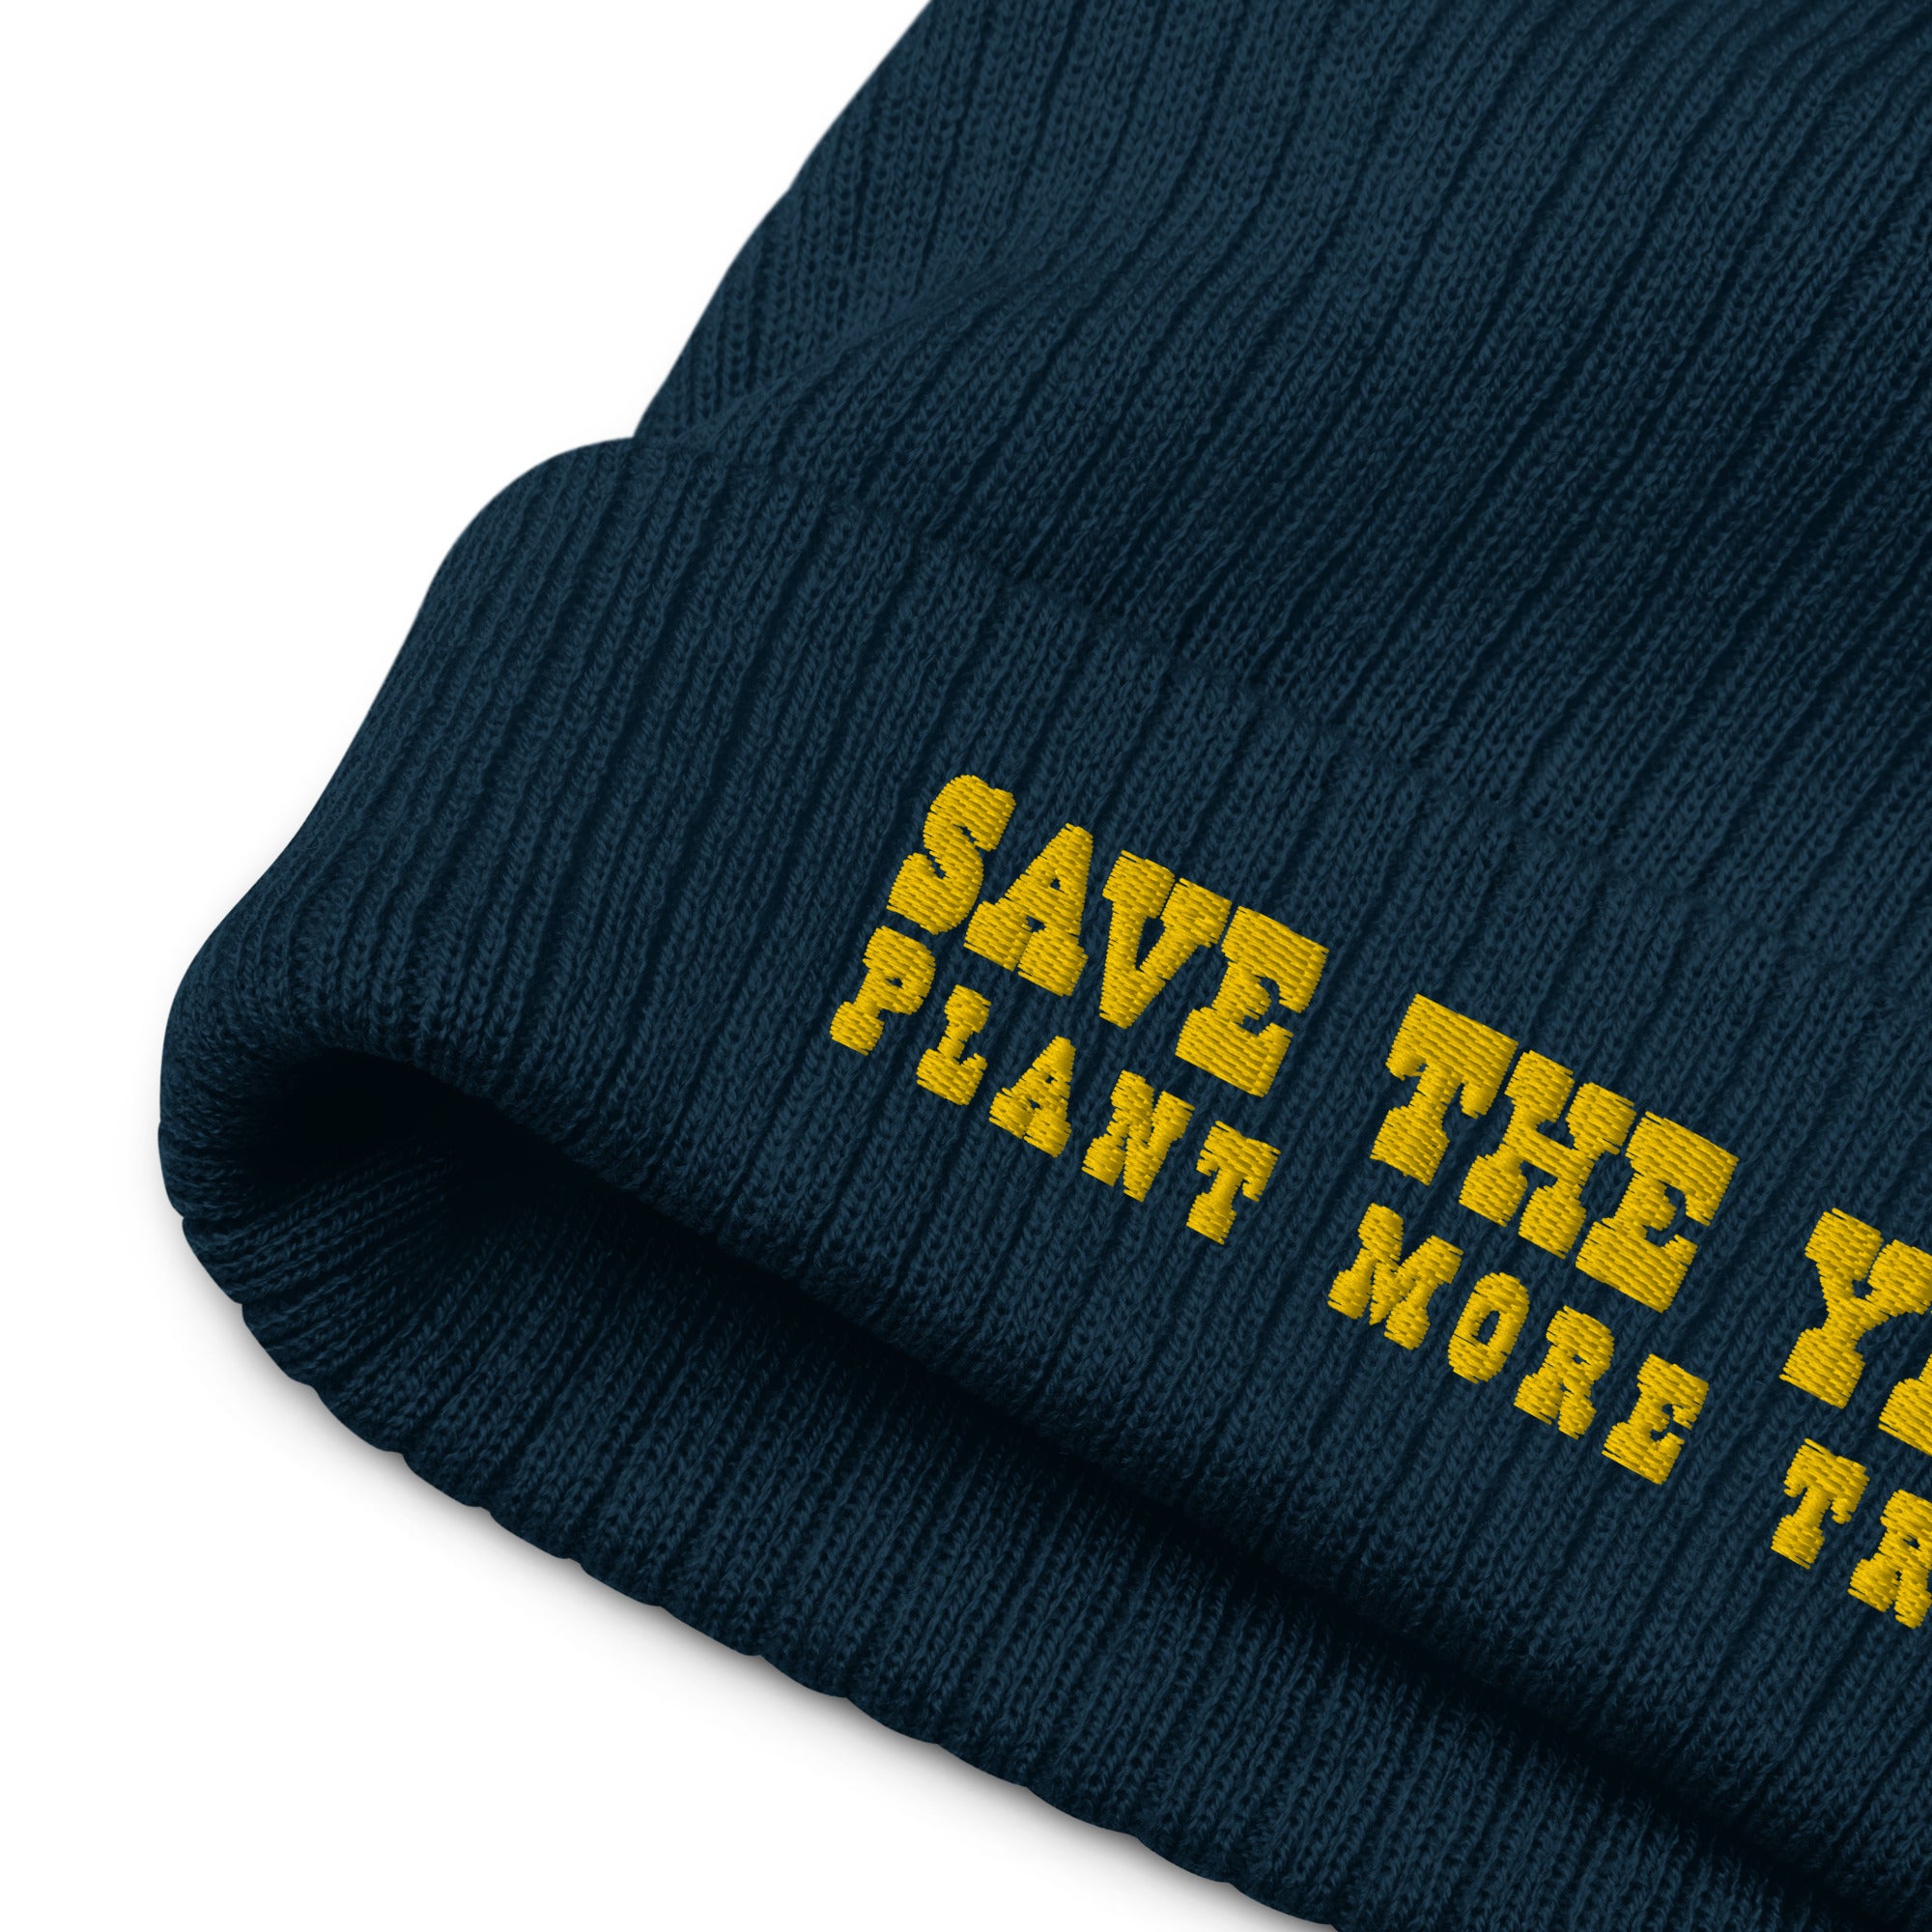 Eco ribbed knit beanie Save the Yetis, Plant more Trees Gold